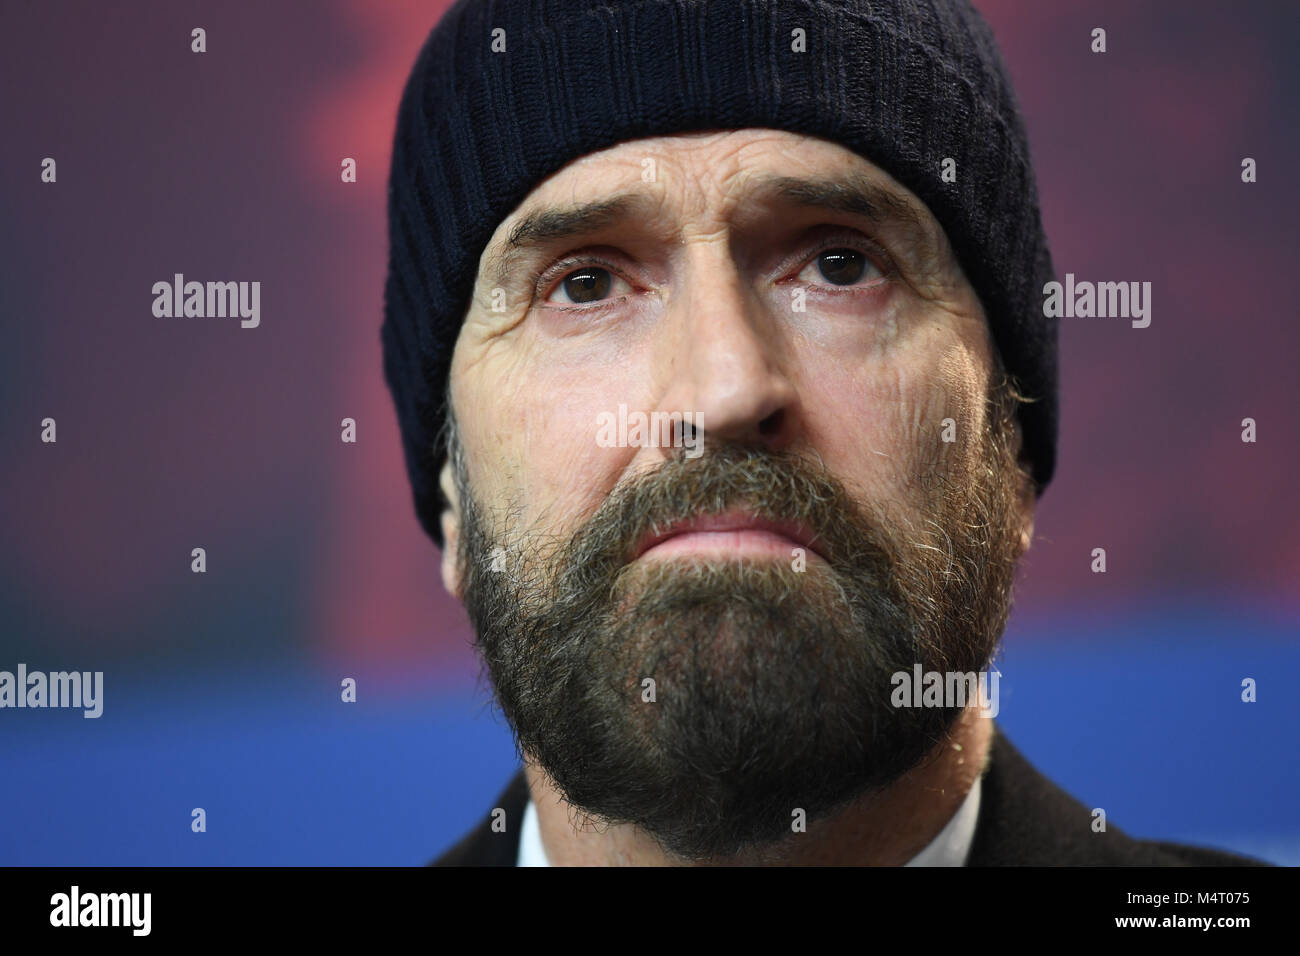 Berlin, Germany. 17th Feb, 2018. Rupert Everett, director, actor, screenwriter, during the press conference of the film 'The Happy Prince' at the Berlinale 2018 Film Festival in Berlin, Germany, 17 February 2018. The film runs in the 'Berlinale Special Gala' section of the 68th International Berlin Film Festival. Credit: Maurizio Gambarini/dpa/Alamy Live News Stock Photo